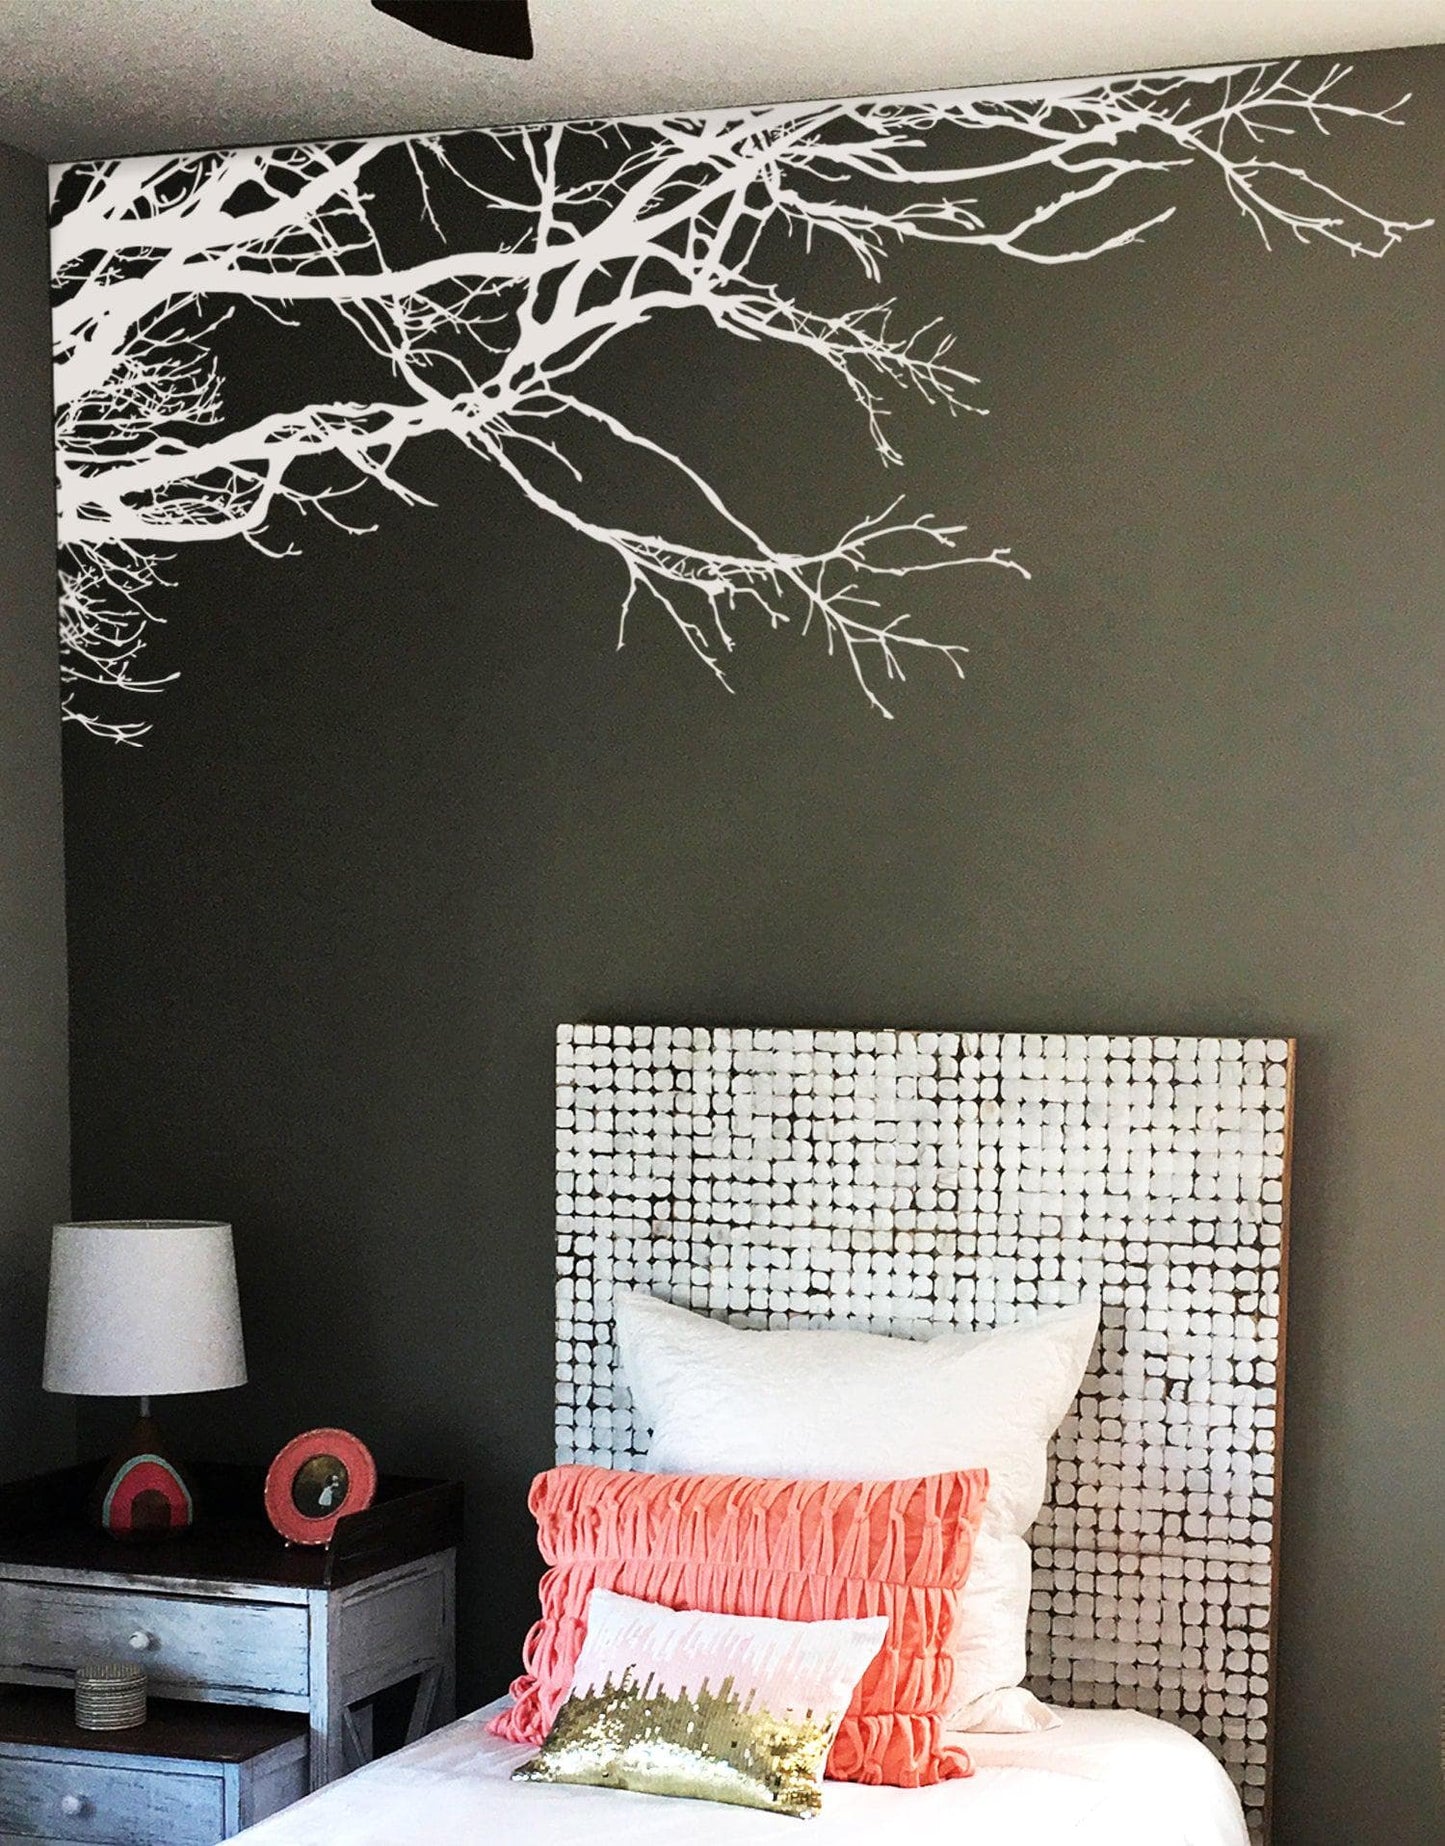 A dark wall with a white tree decal, adding a natural ambiance in the room. 